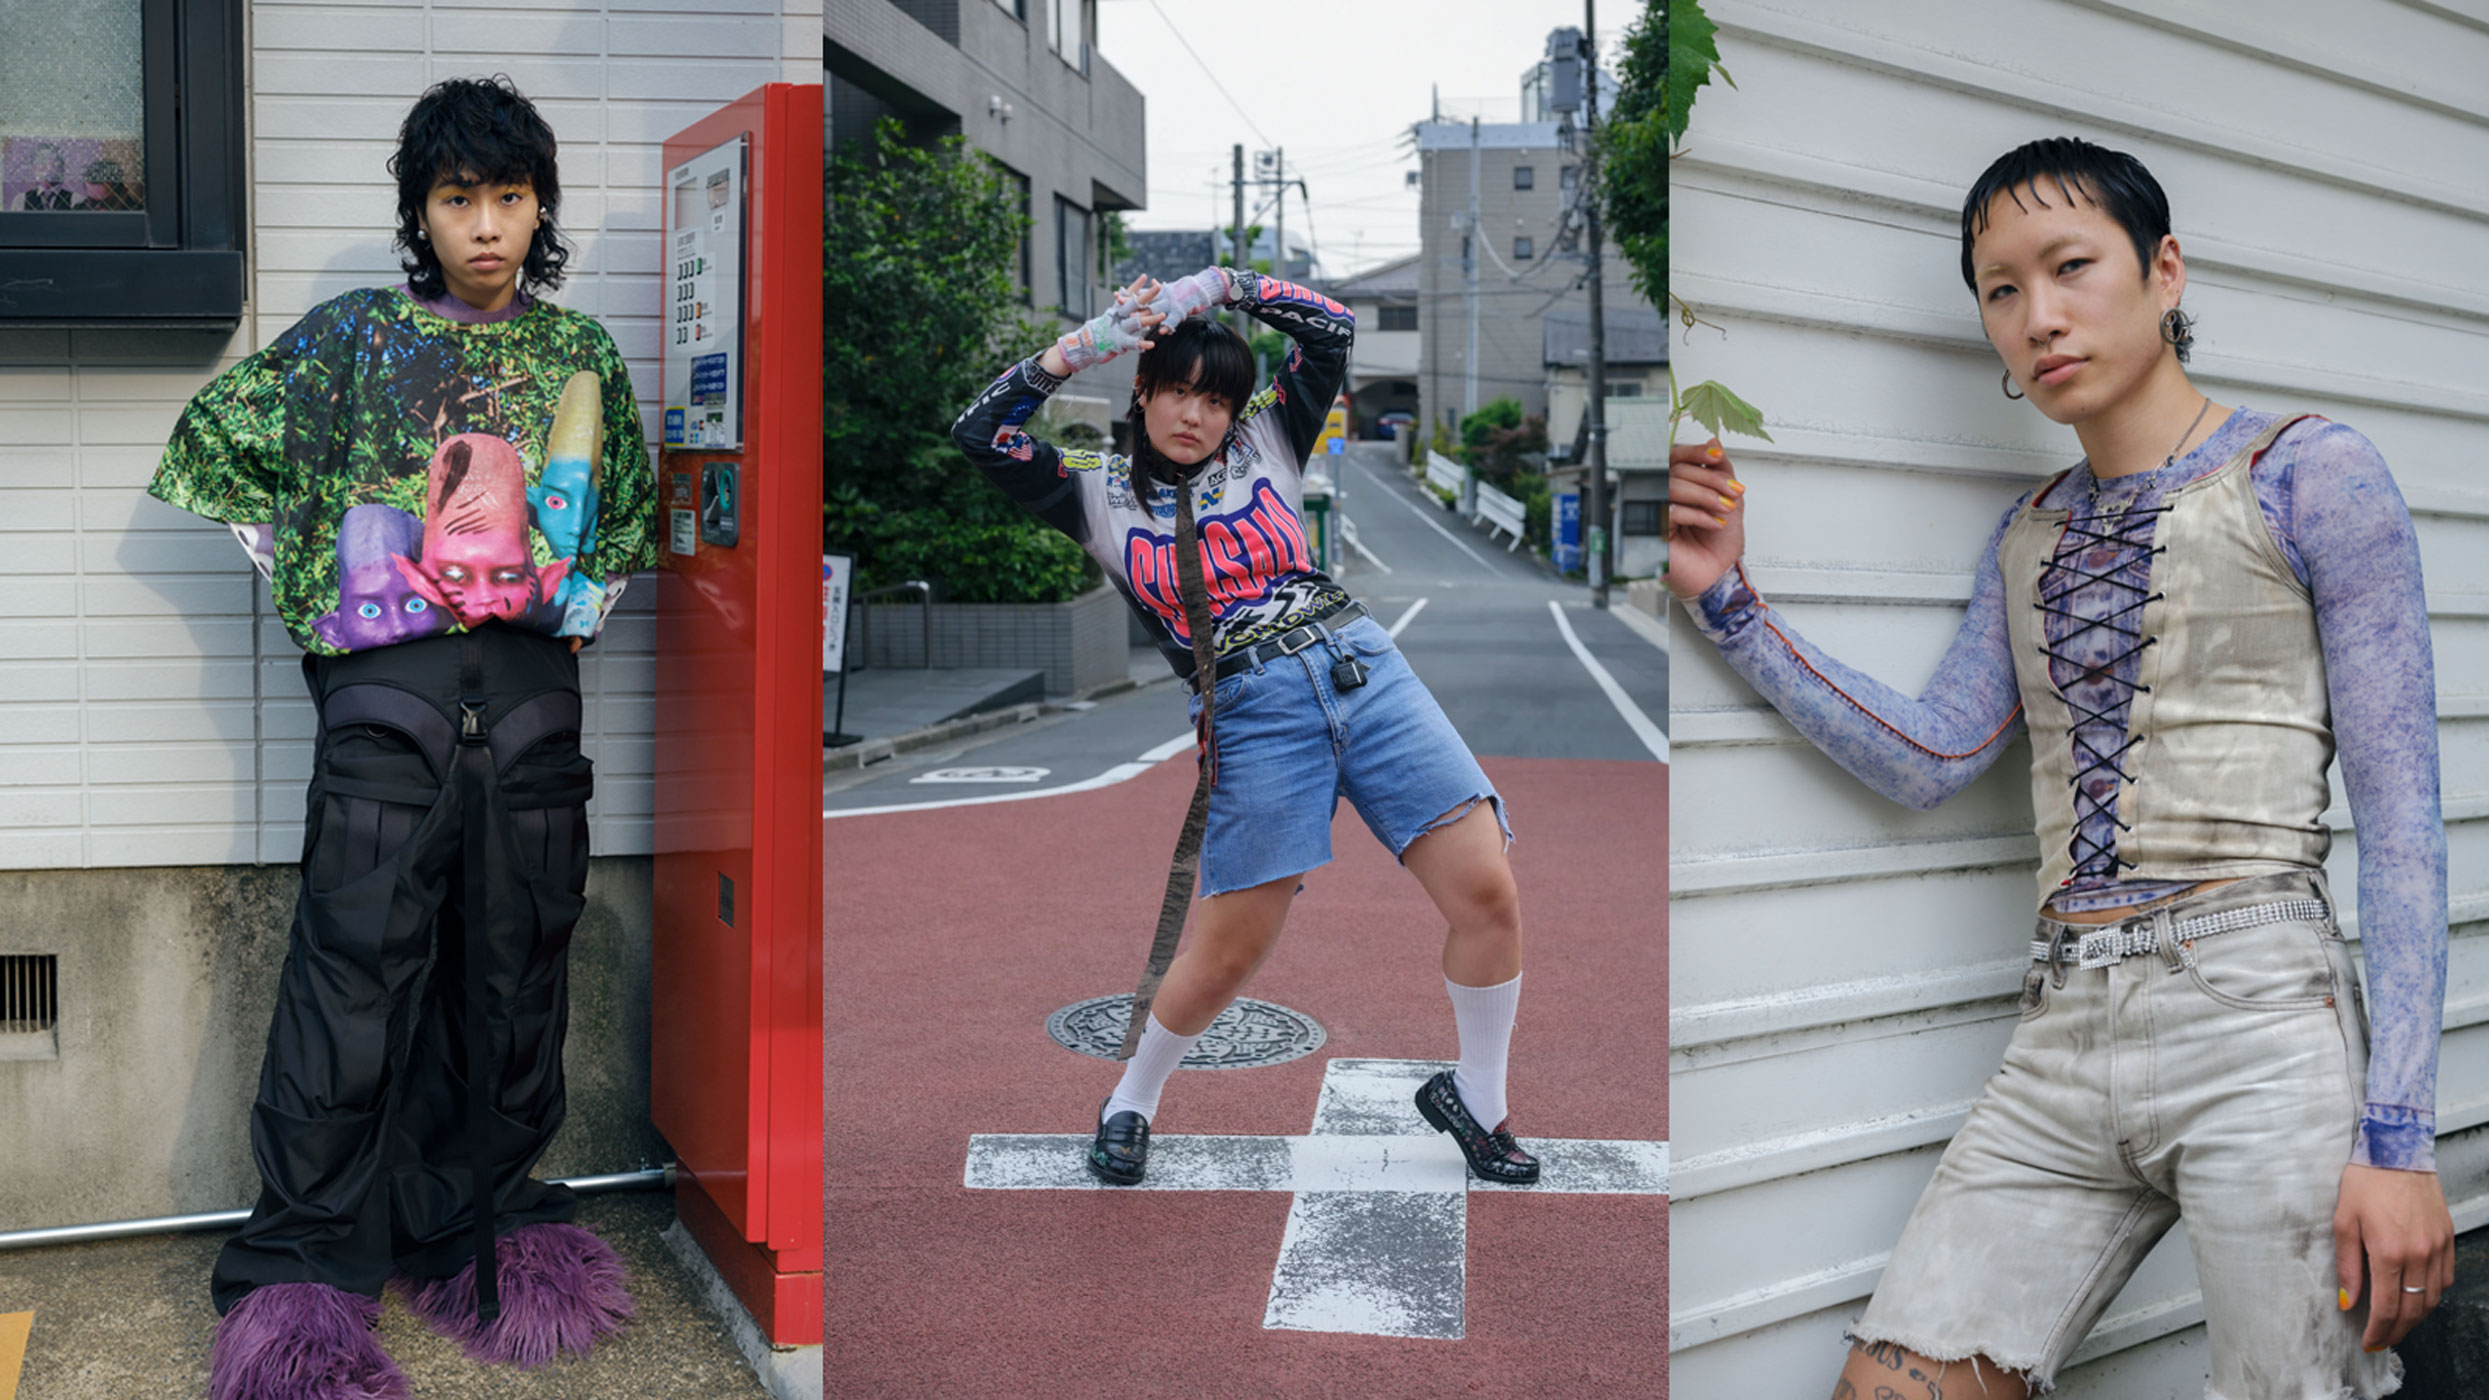 Takashi Homma photographs Tokyos resilient young queer community picture